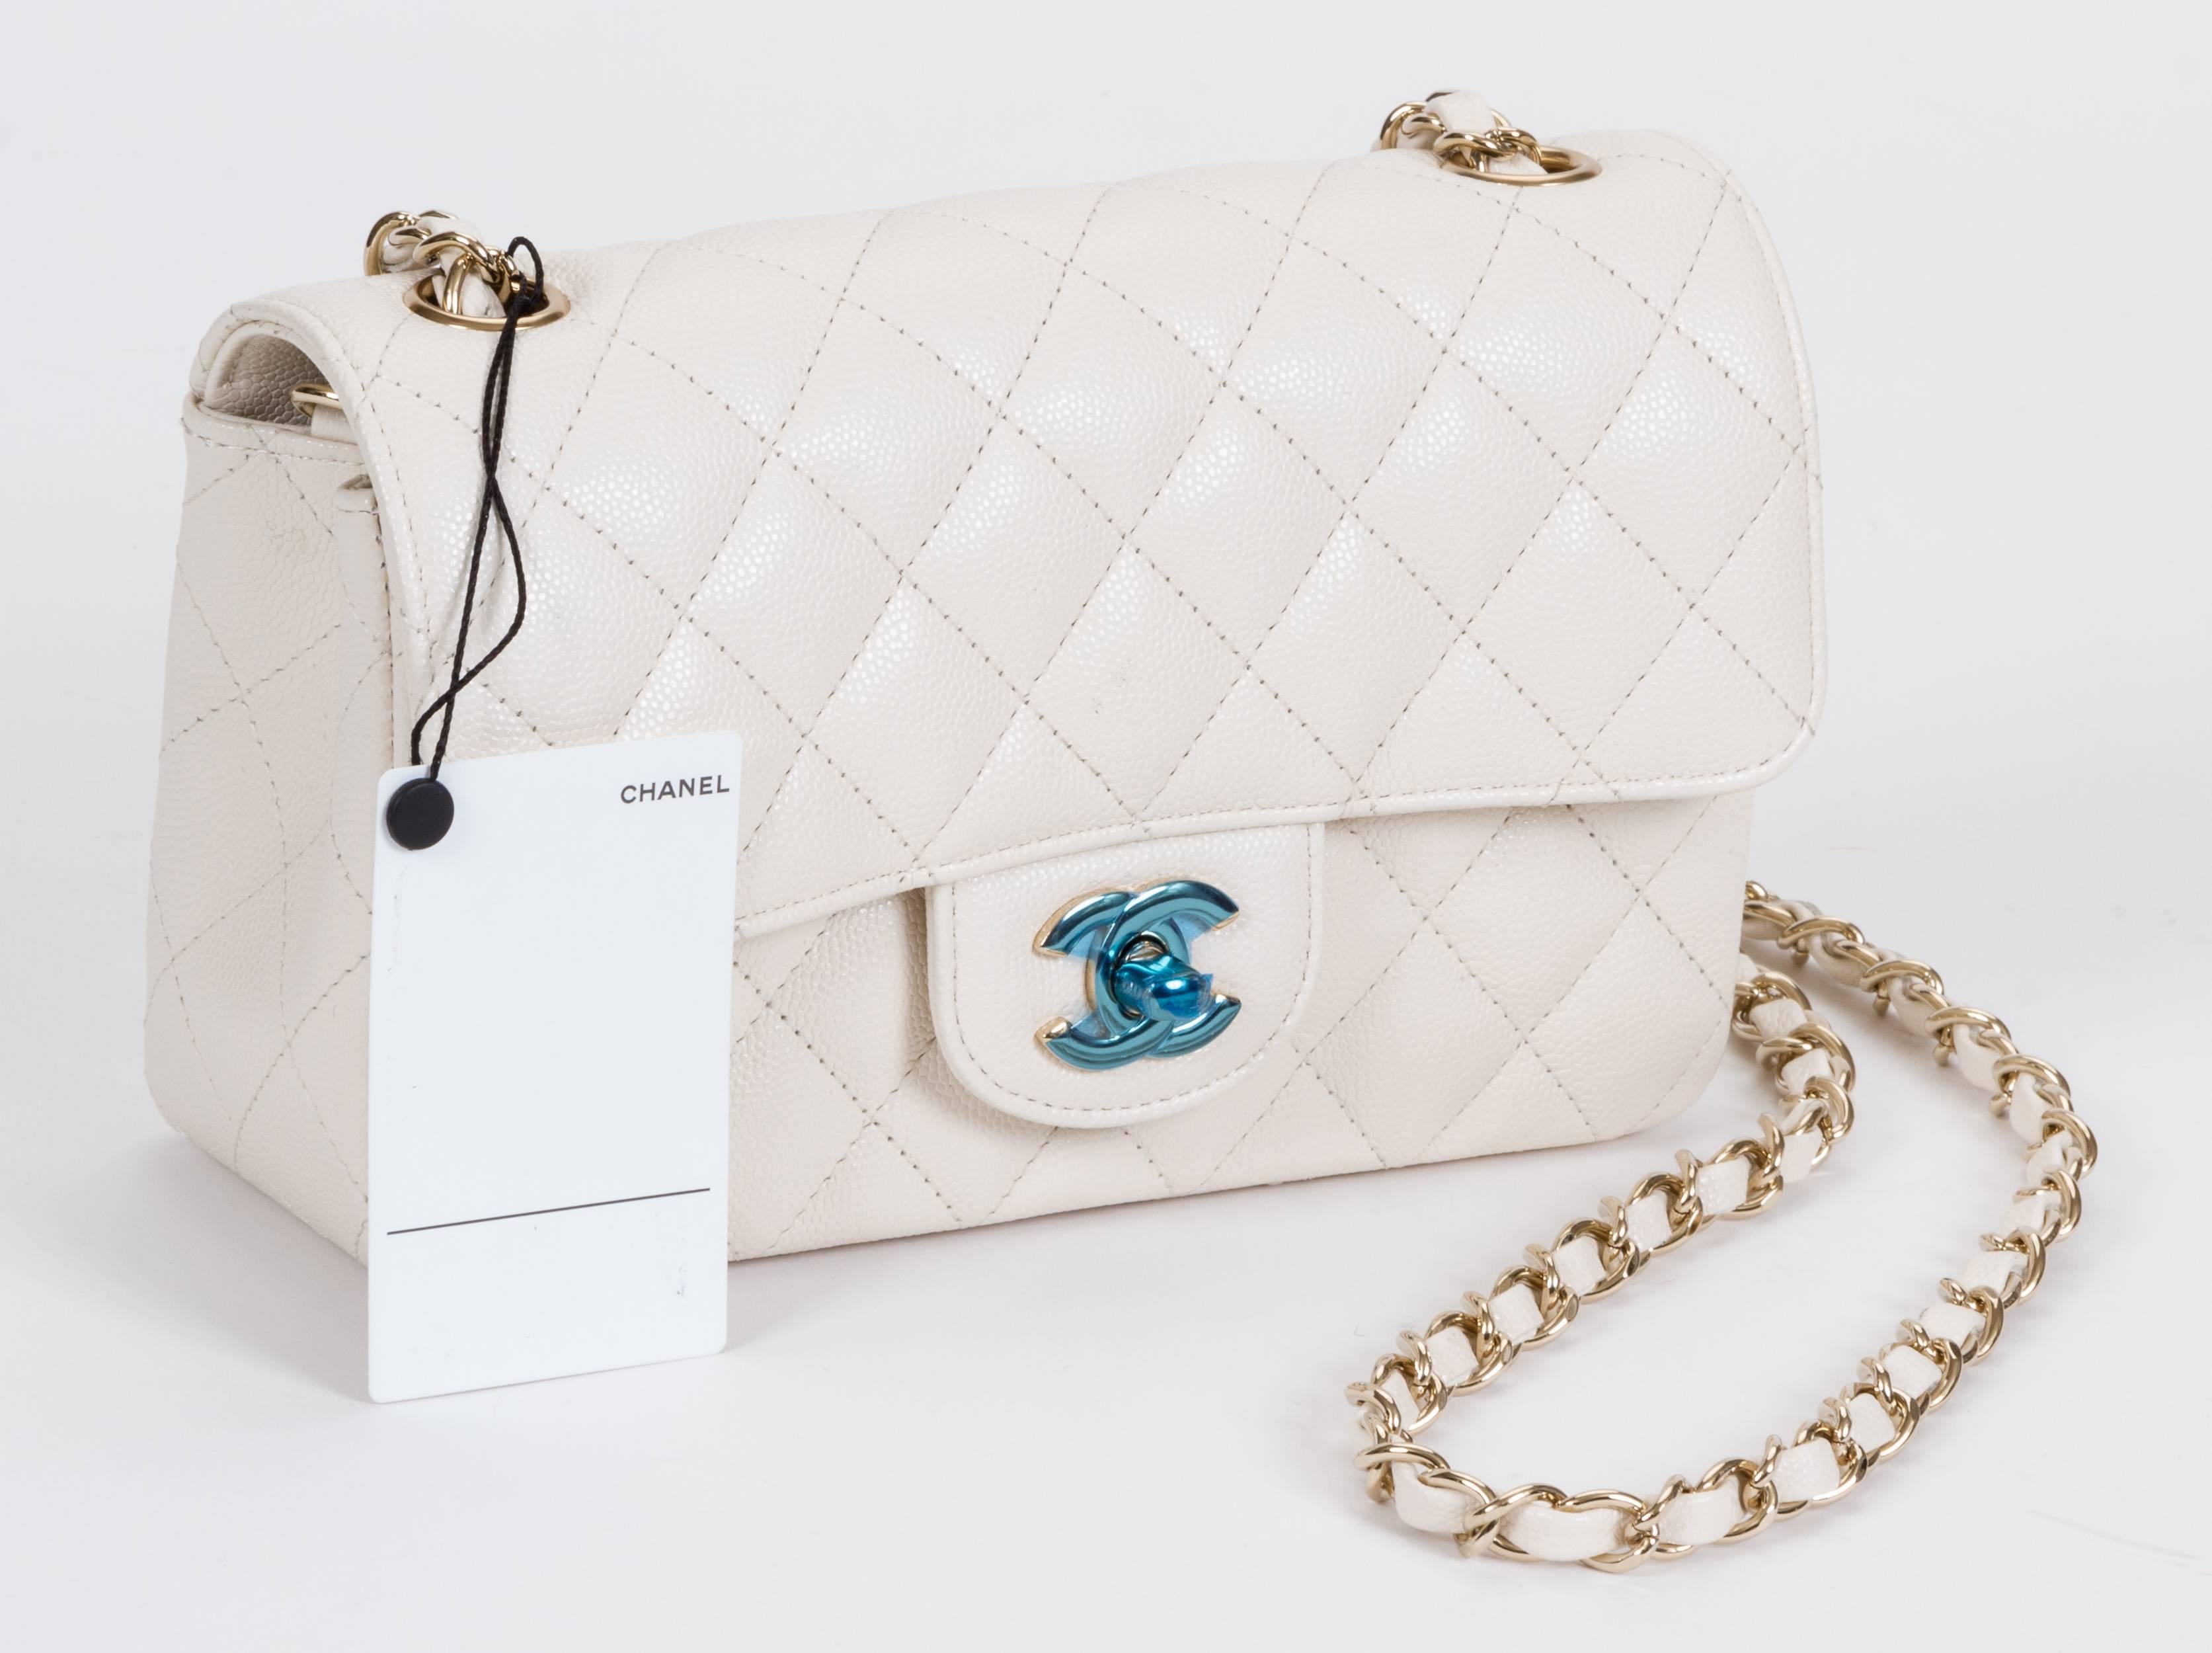 Chanel brand new mini cross body in white caviar leather with gold tone hardware. Plastic still on hardware. Shoulder drop 22